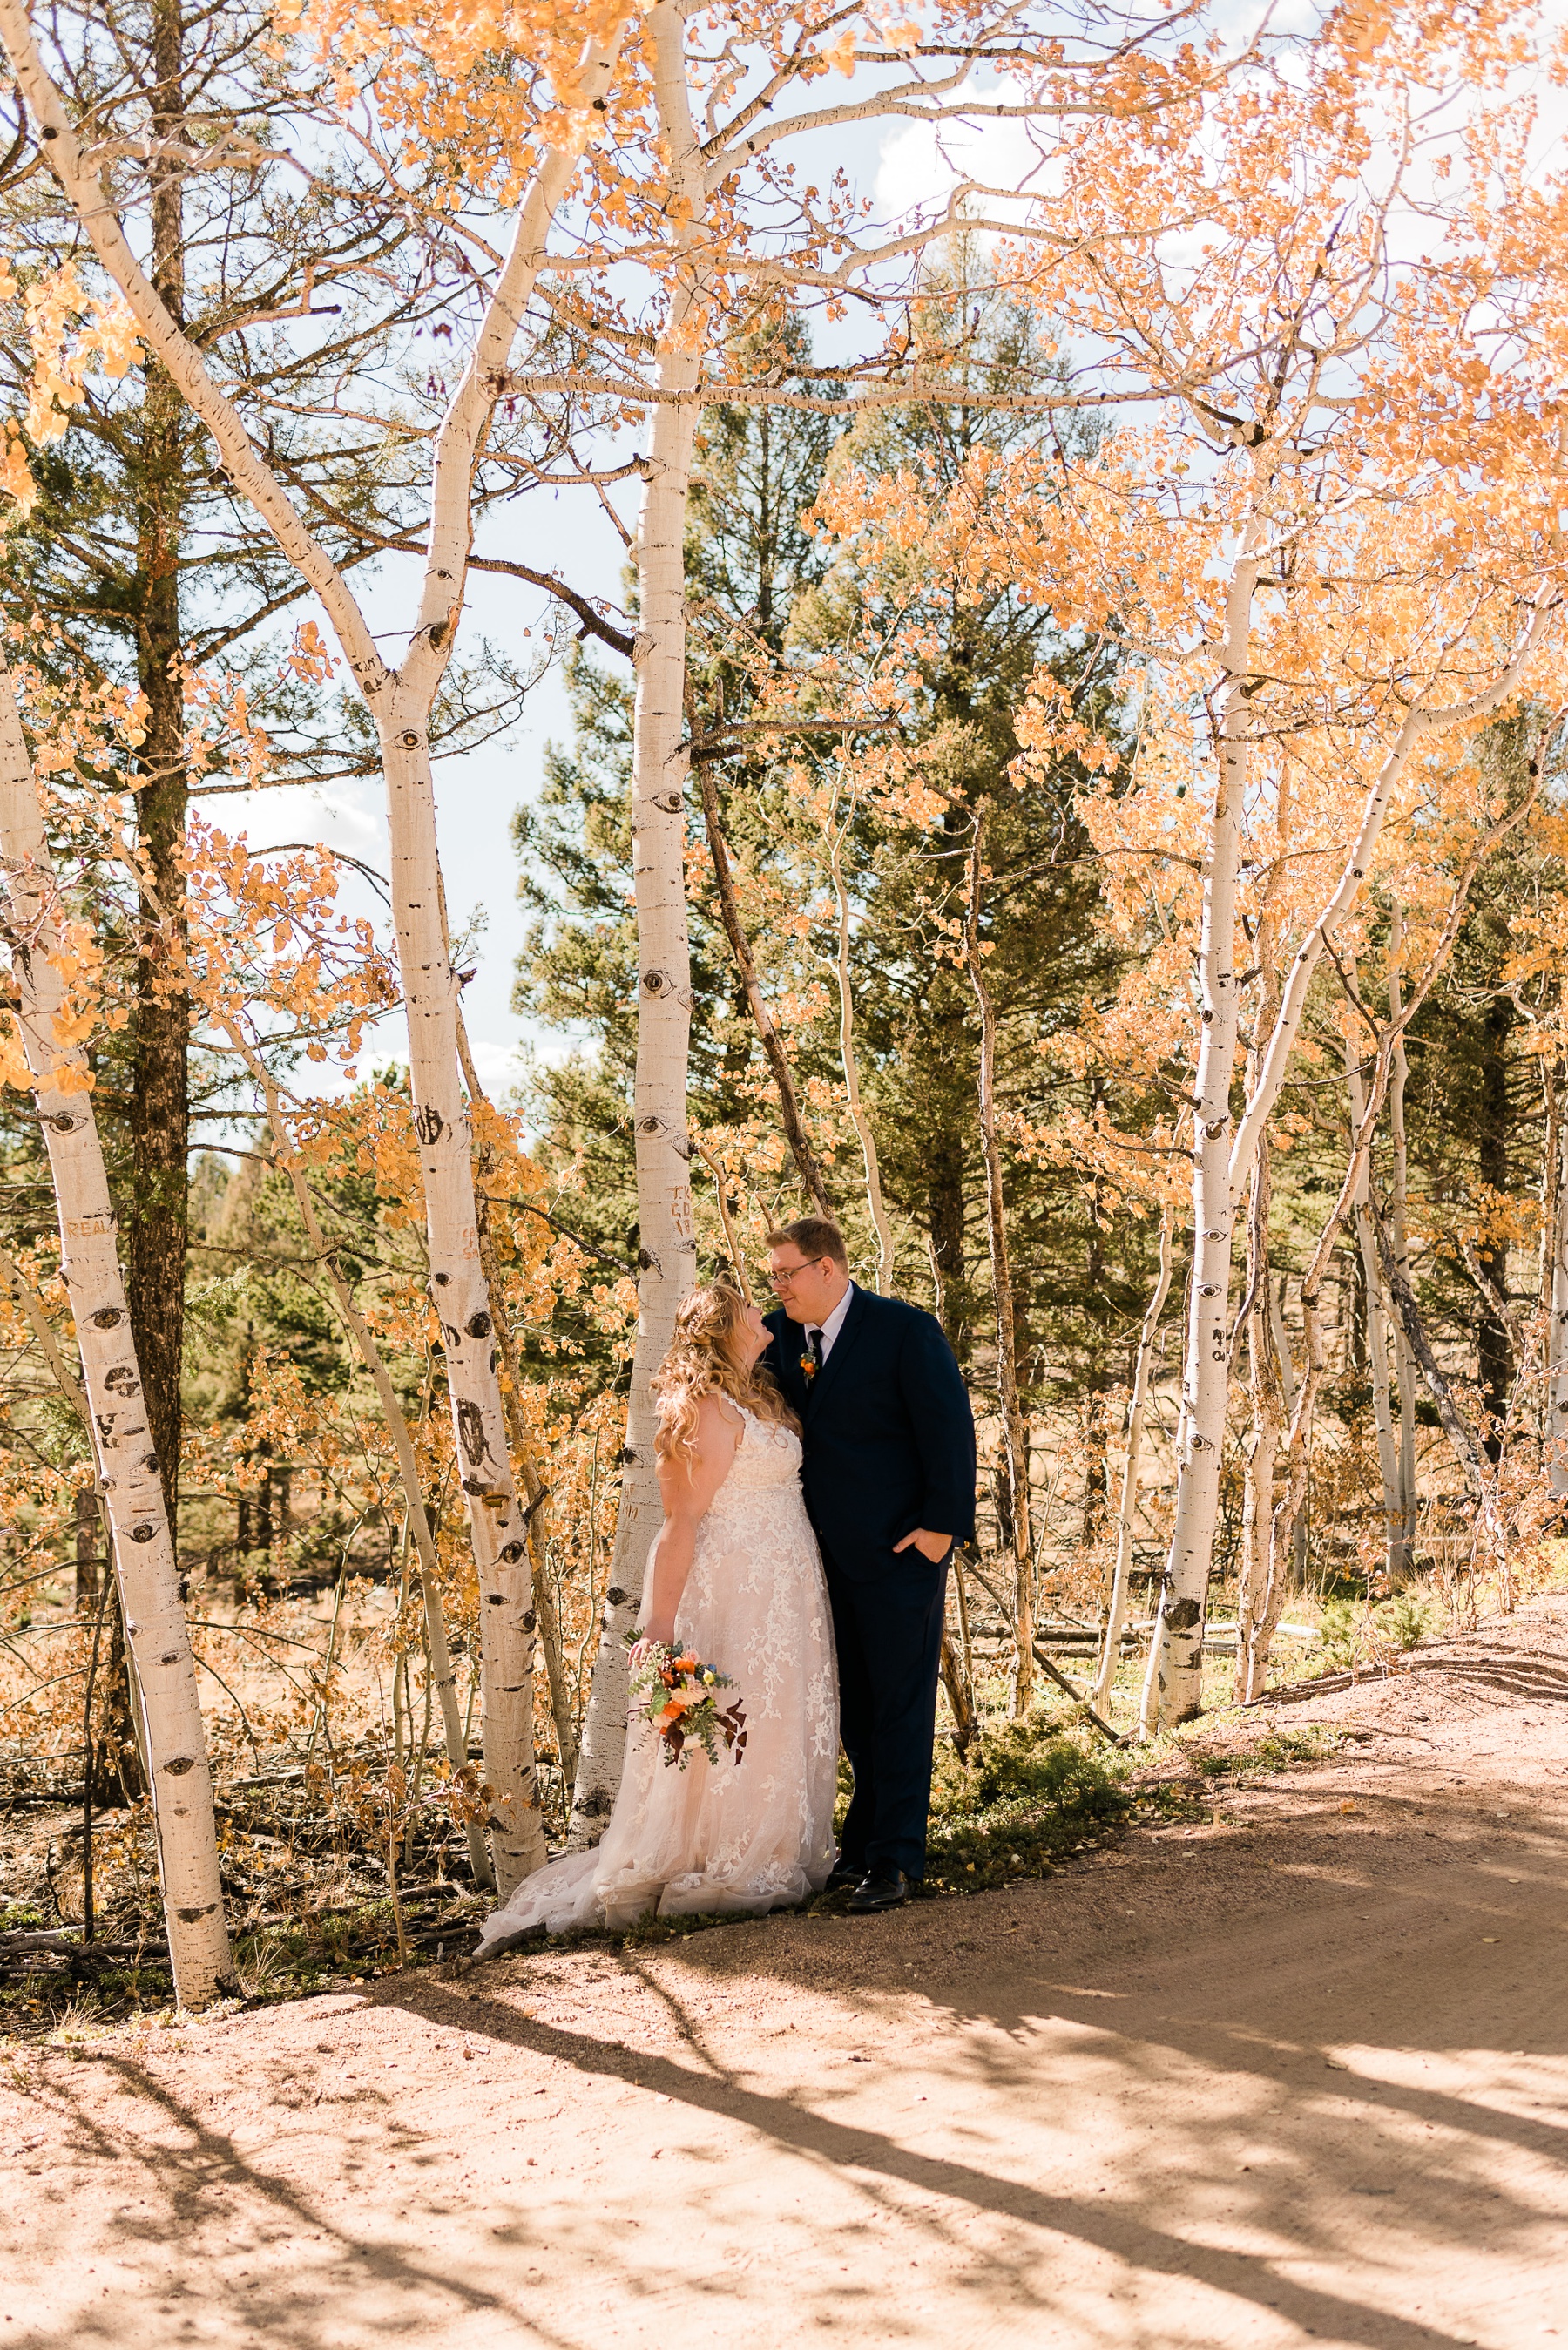 Bride and groom with aspen trees with yellow leaves behind them.